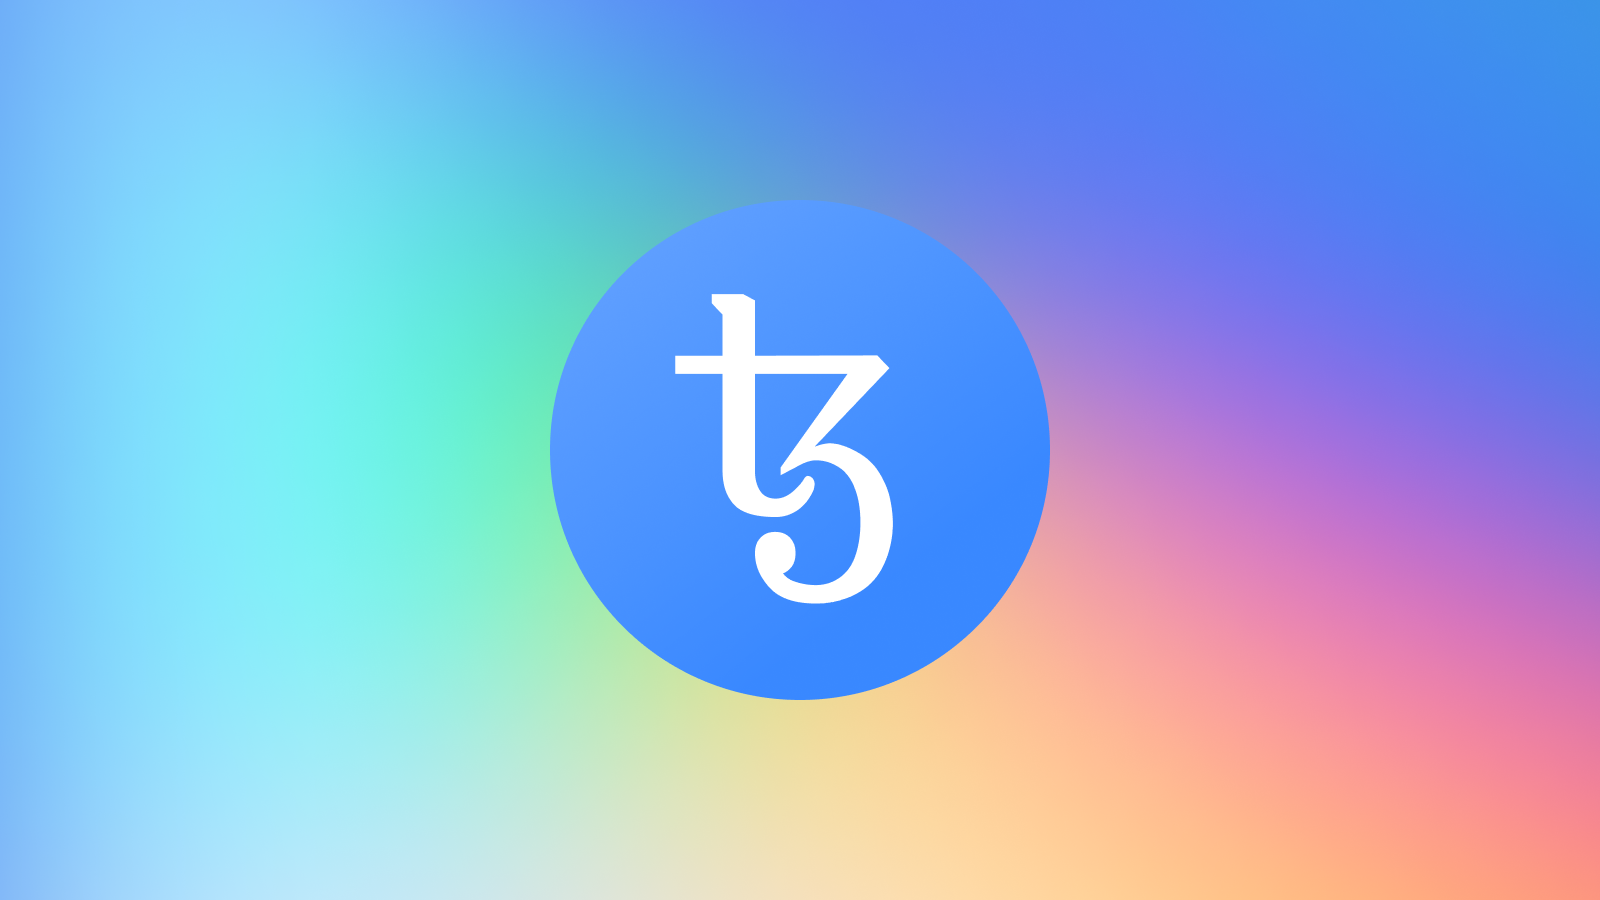 Mint your own Tezos collections on Rarible.com